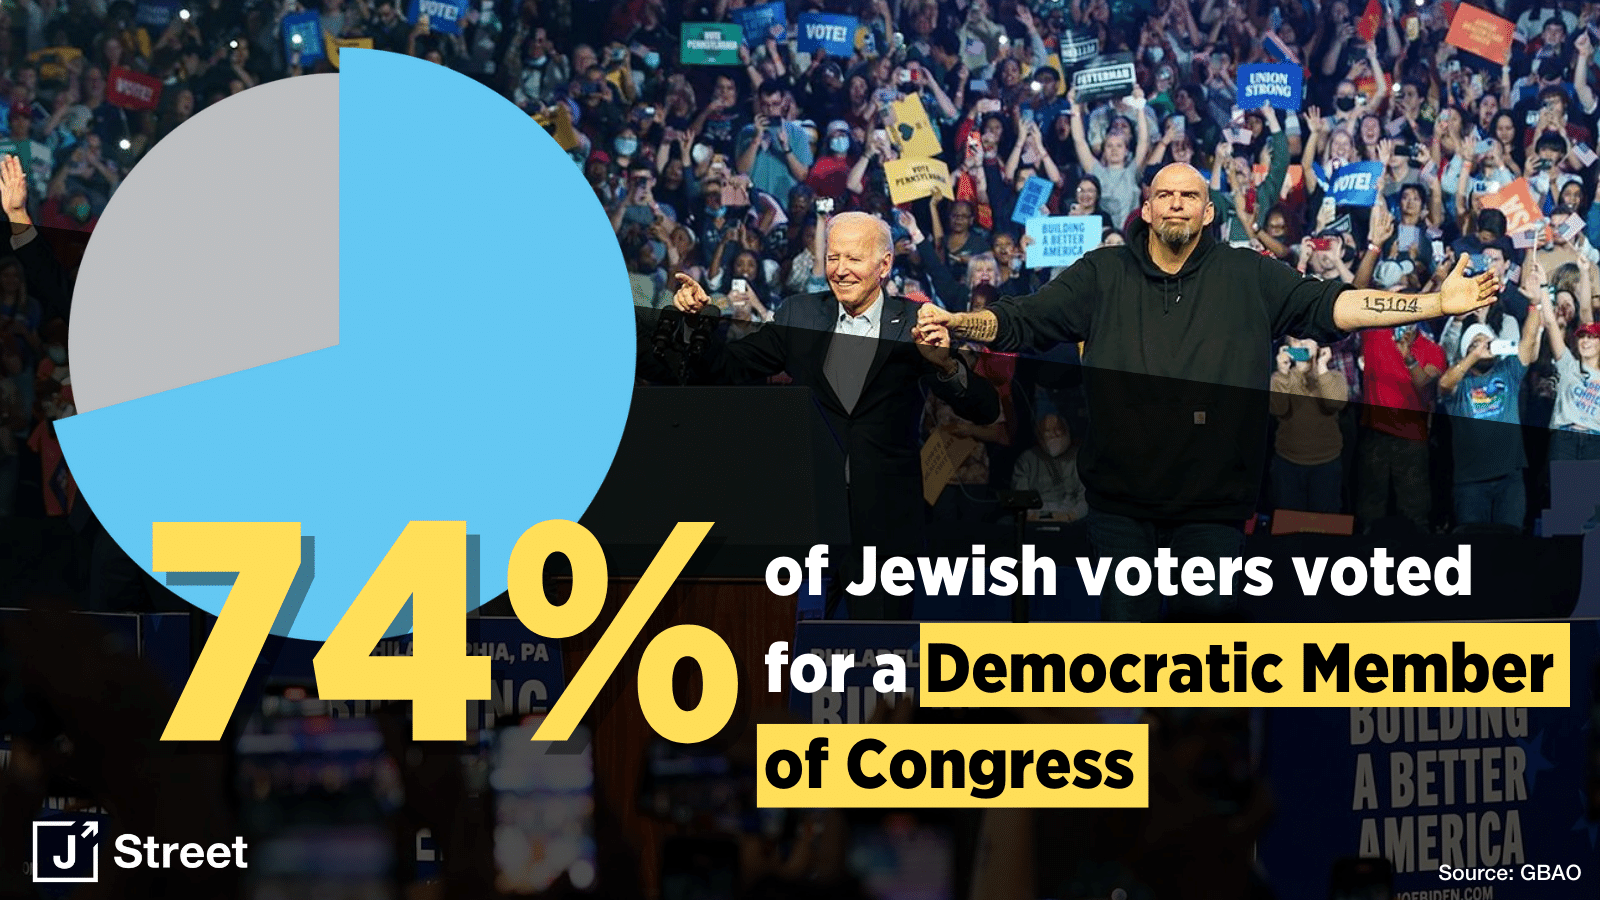 74% voted for a Democratic member of Congress.